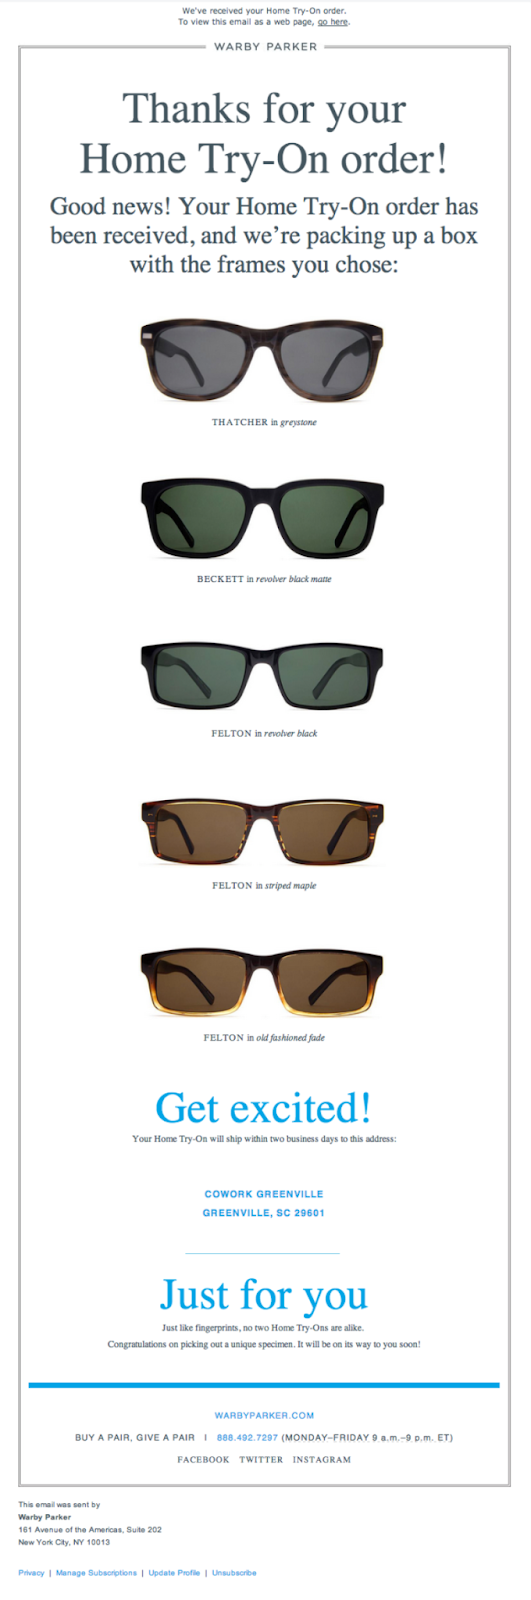 Example of a Warby Parker order confirmation email 